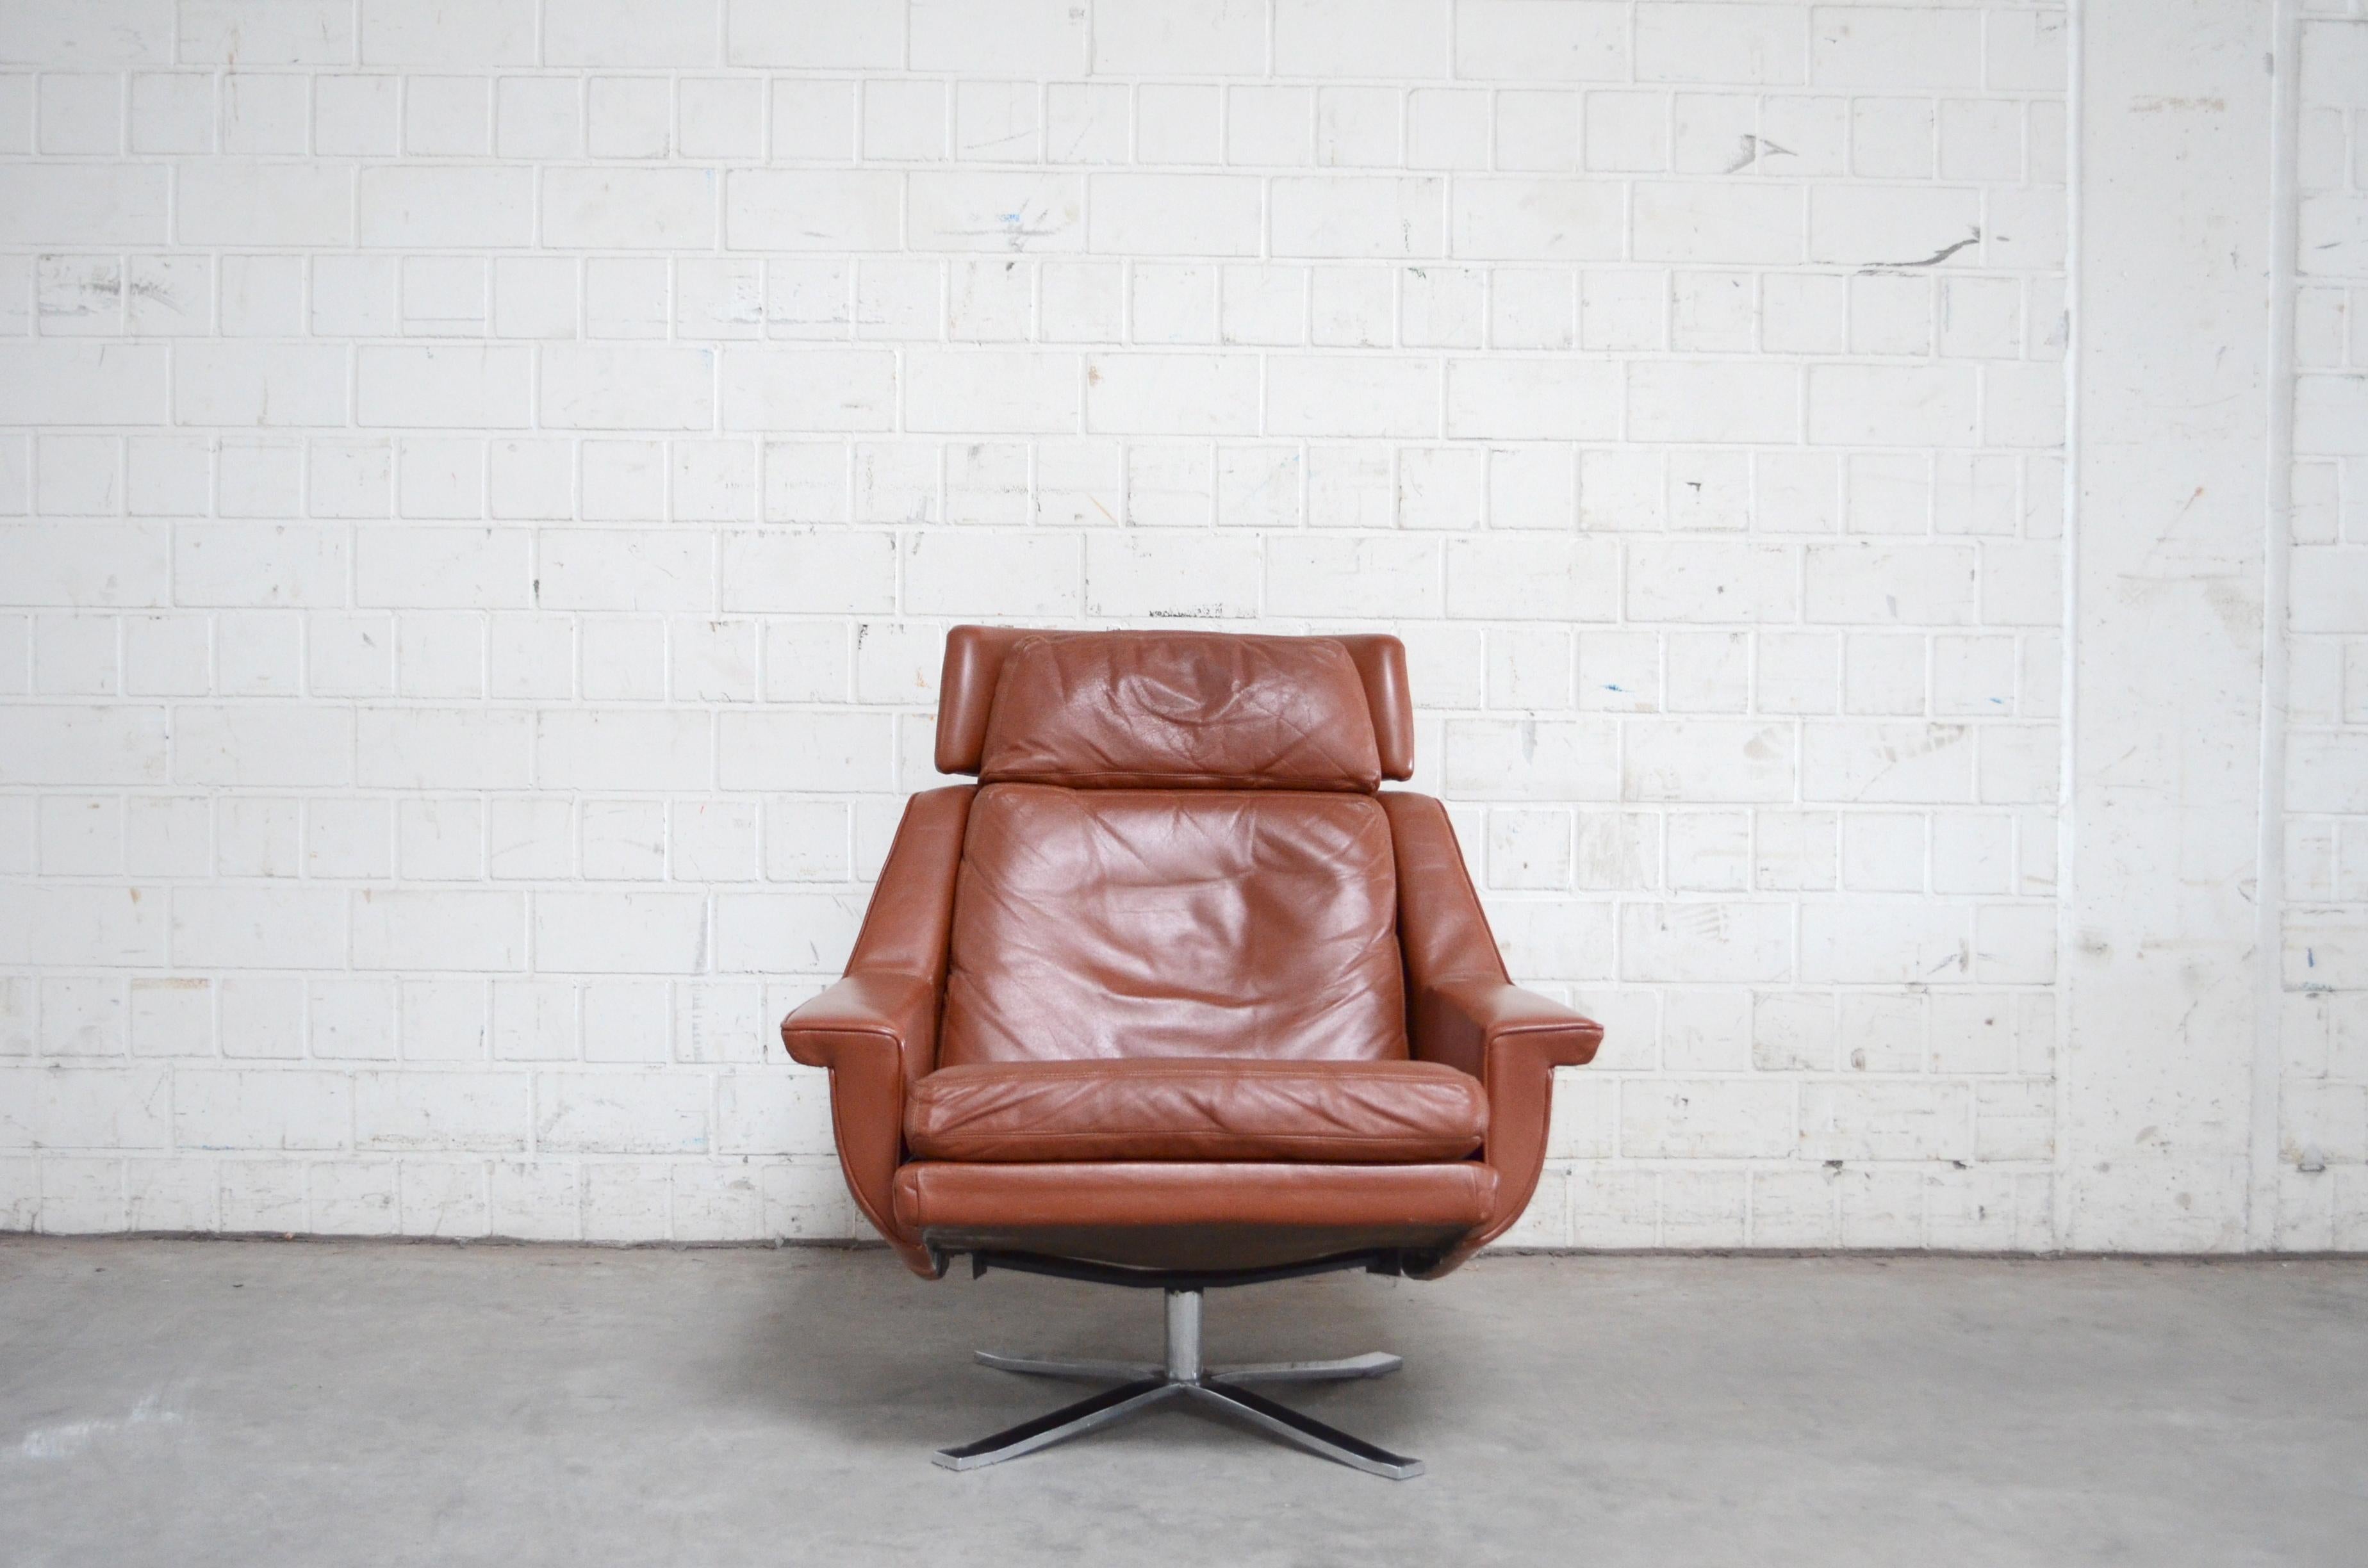 Esa Model 802 Leather Danish Lounge Chair and Ottoman by Werner Langenfeld, 1960 For Sale 1